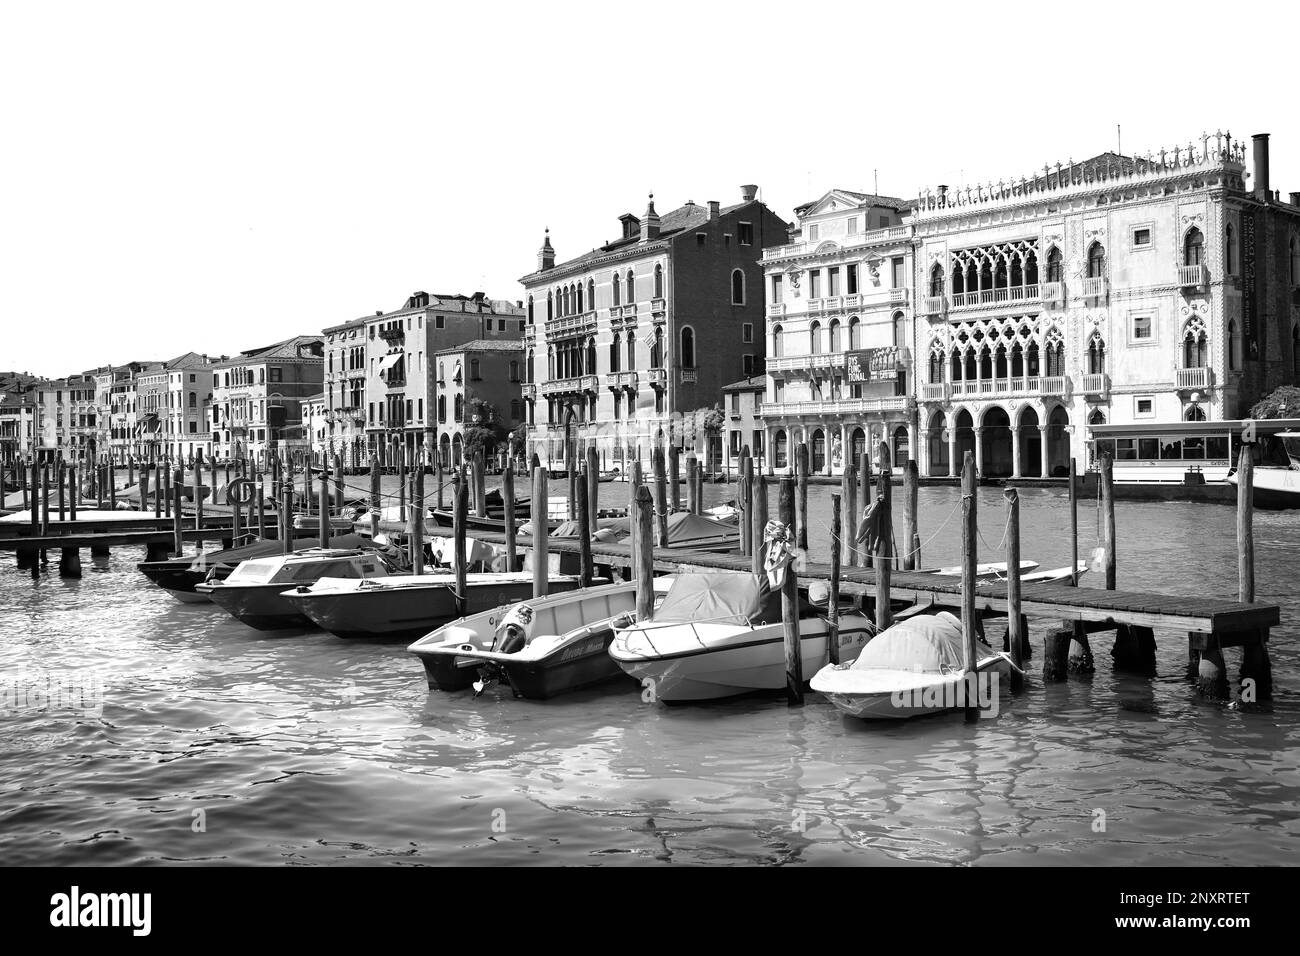 VENICE, ITALY - JUNE 13, 2019: View of Grand Canal with different boats at pier. Black and white tone Stock Photo